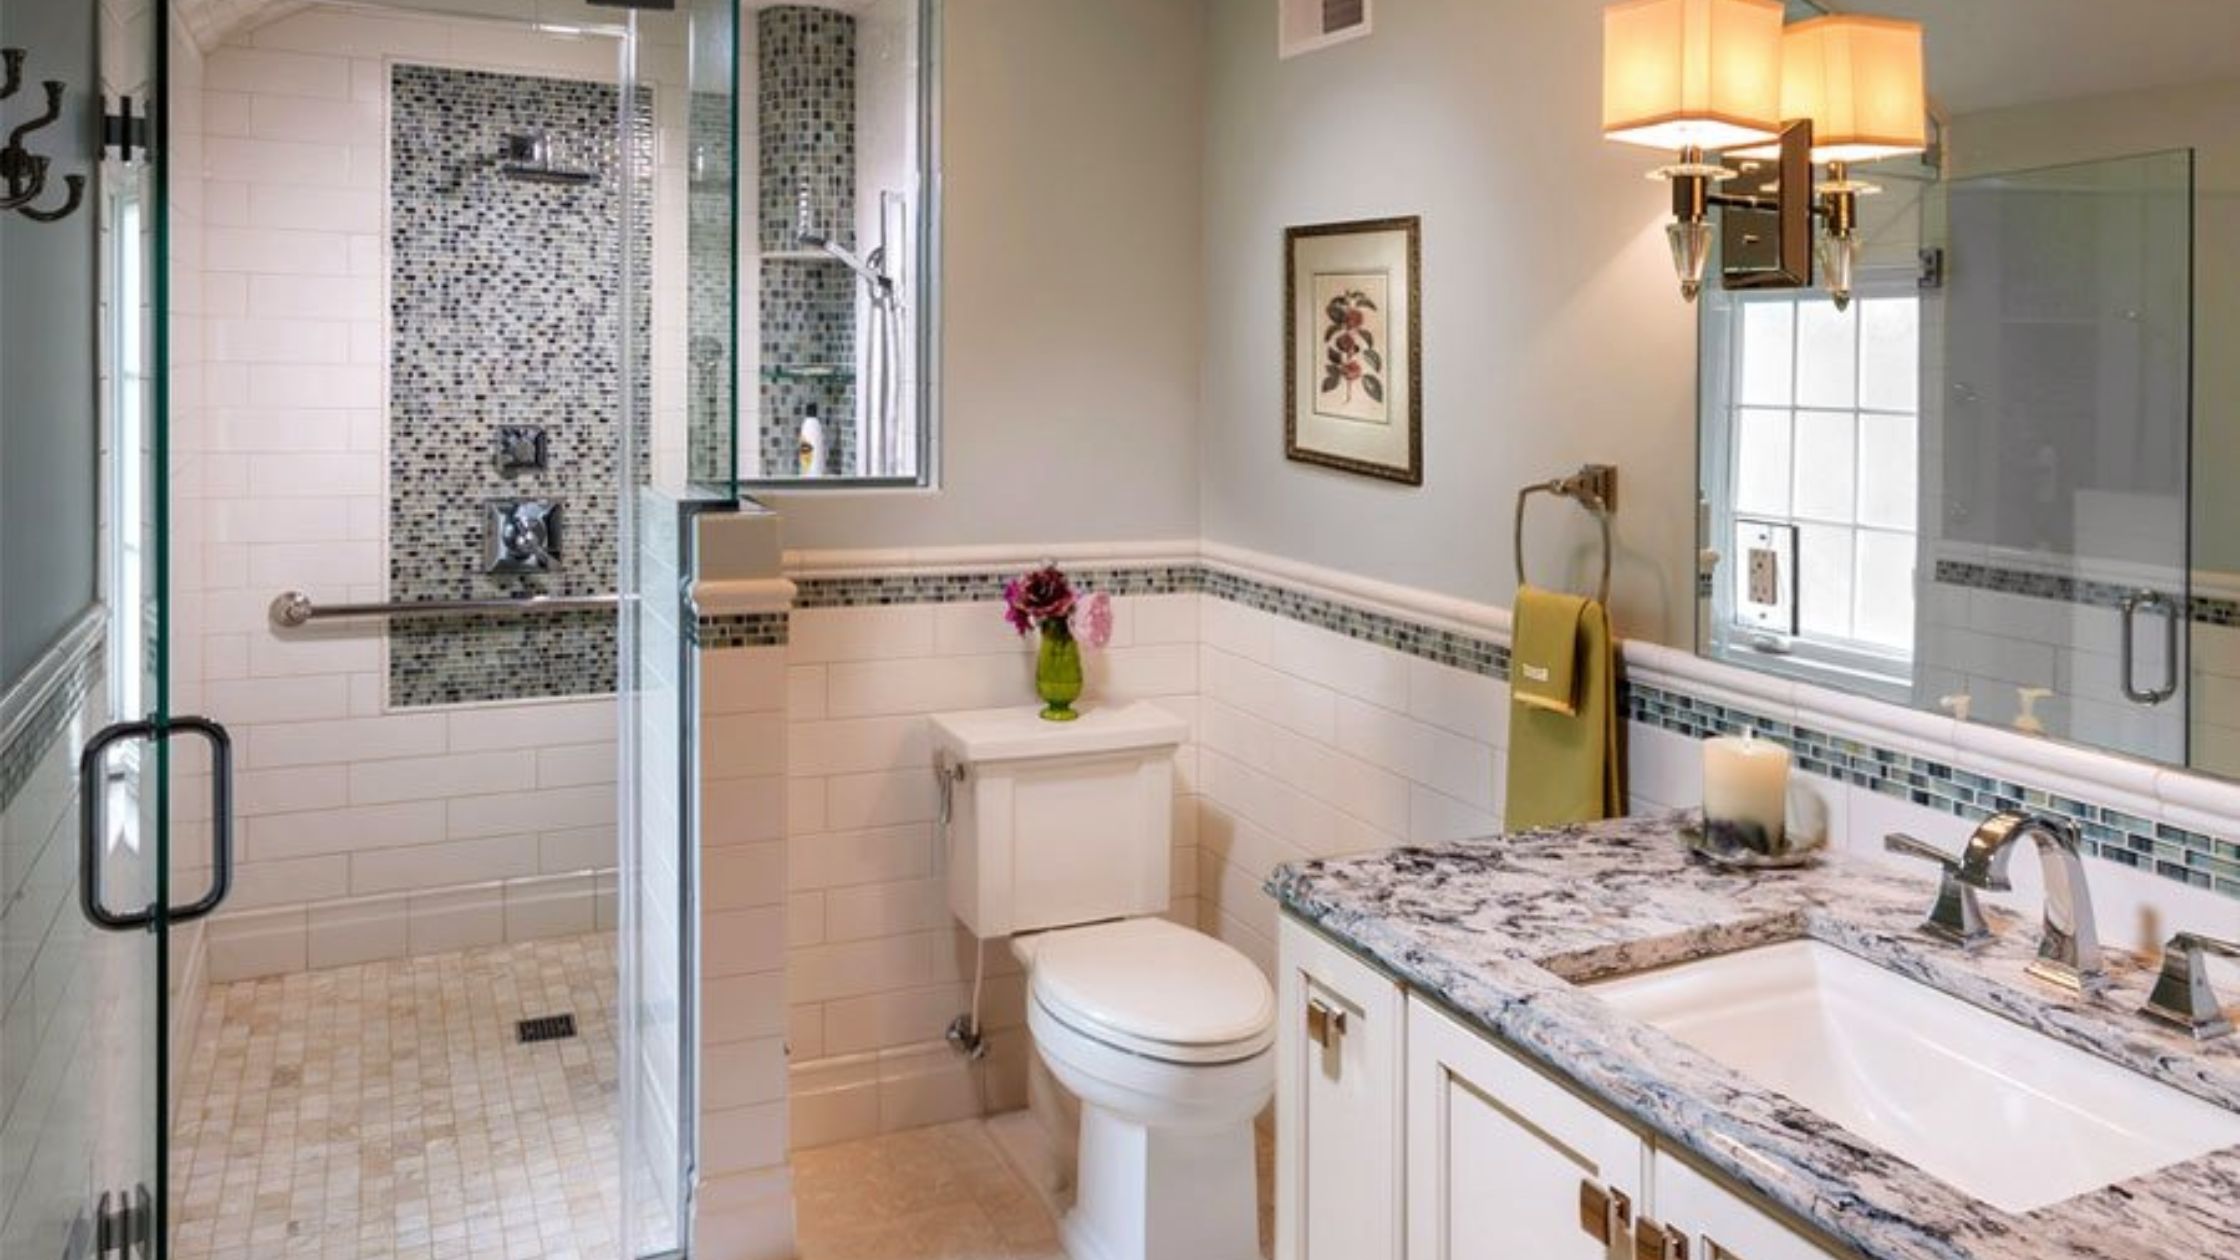 How Much Does a Bathroom Remodel Cost in Central Illinois?